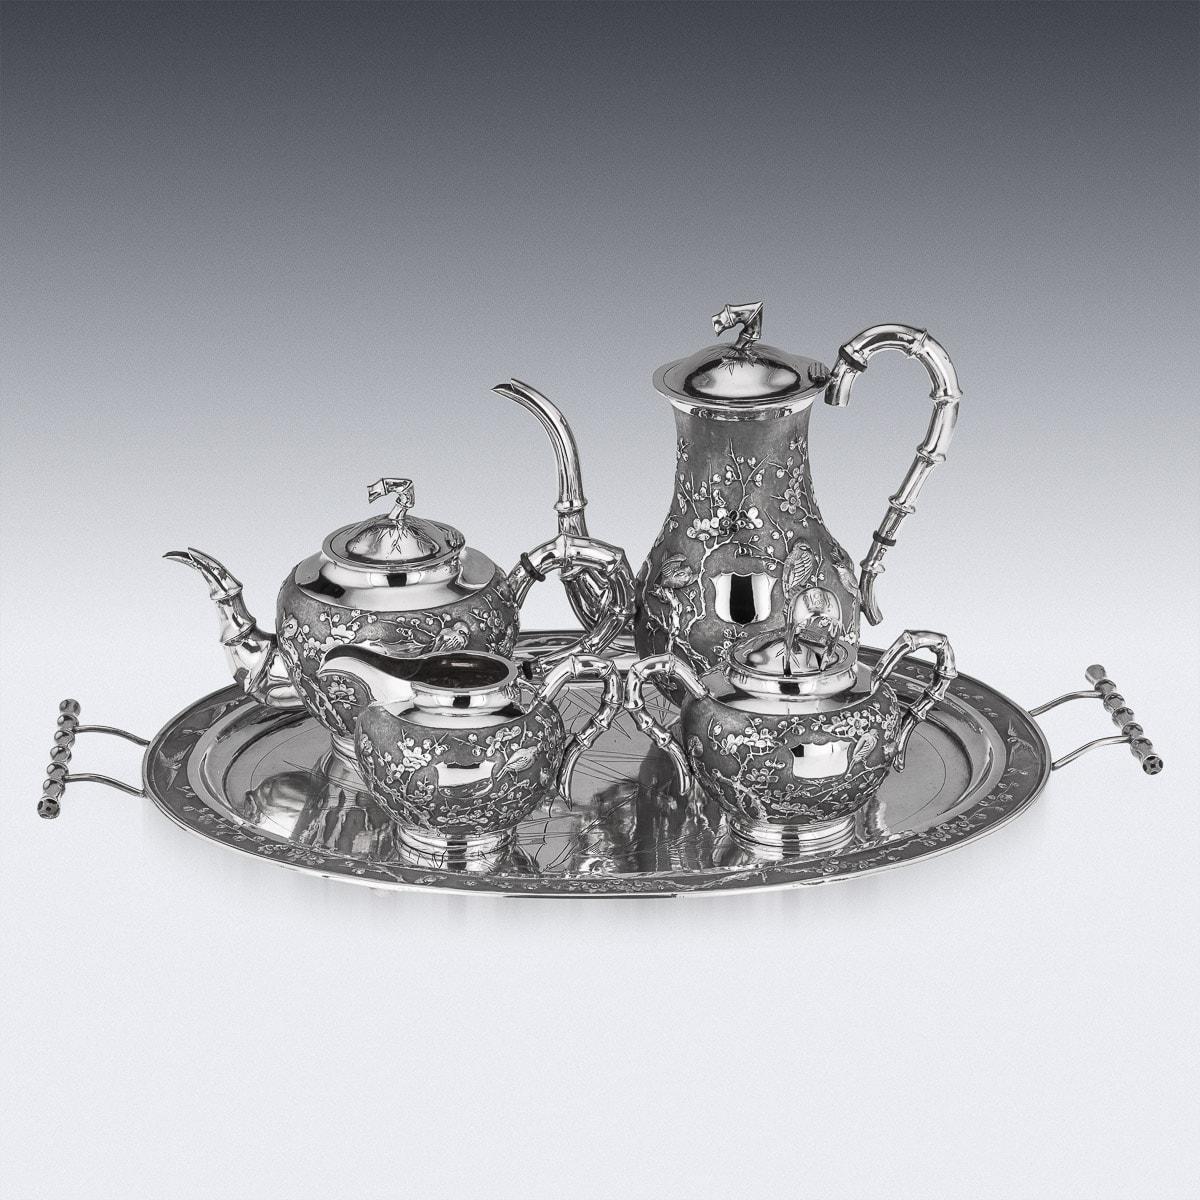 20th Century Chinese Solid Silver Cherry Blossom Tea Set, Siu Kee, circa 1900 For Sale 4